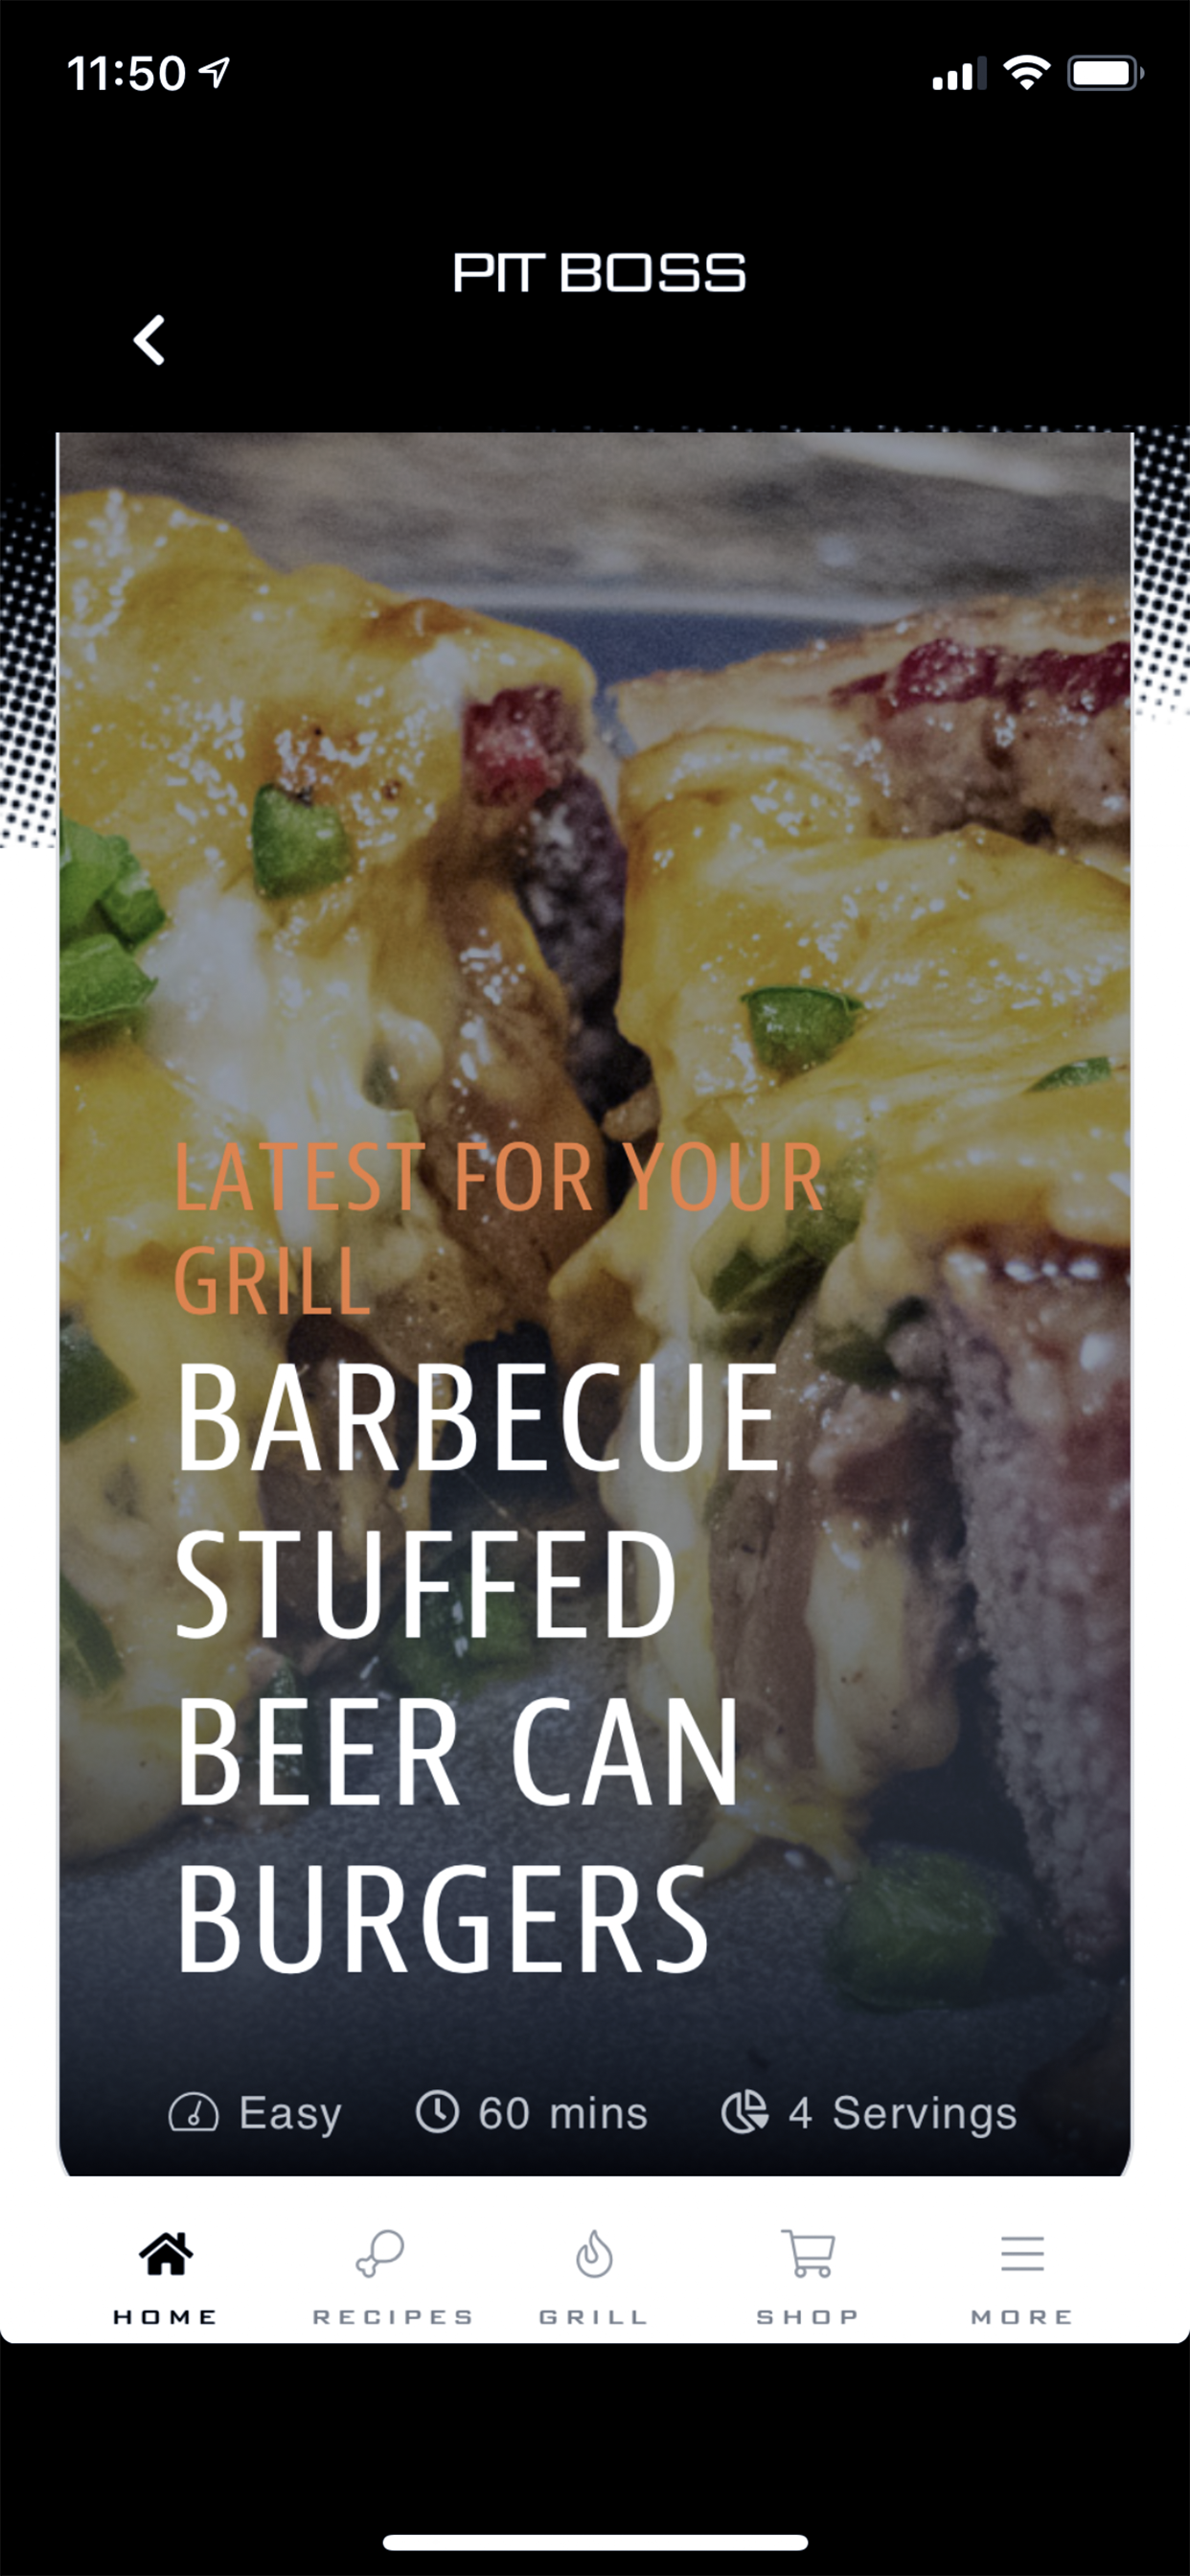 pit boss grill app home screen example